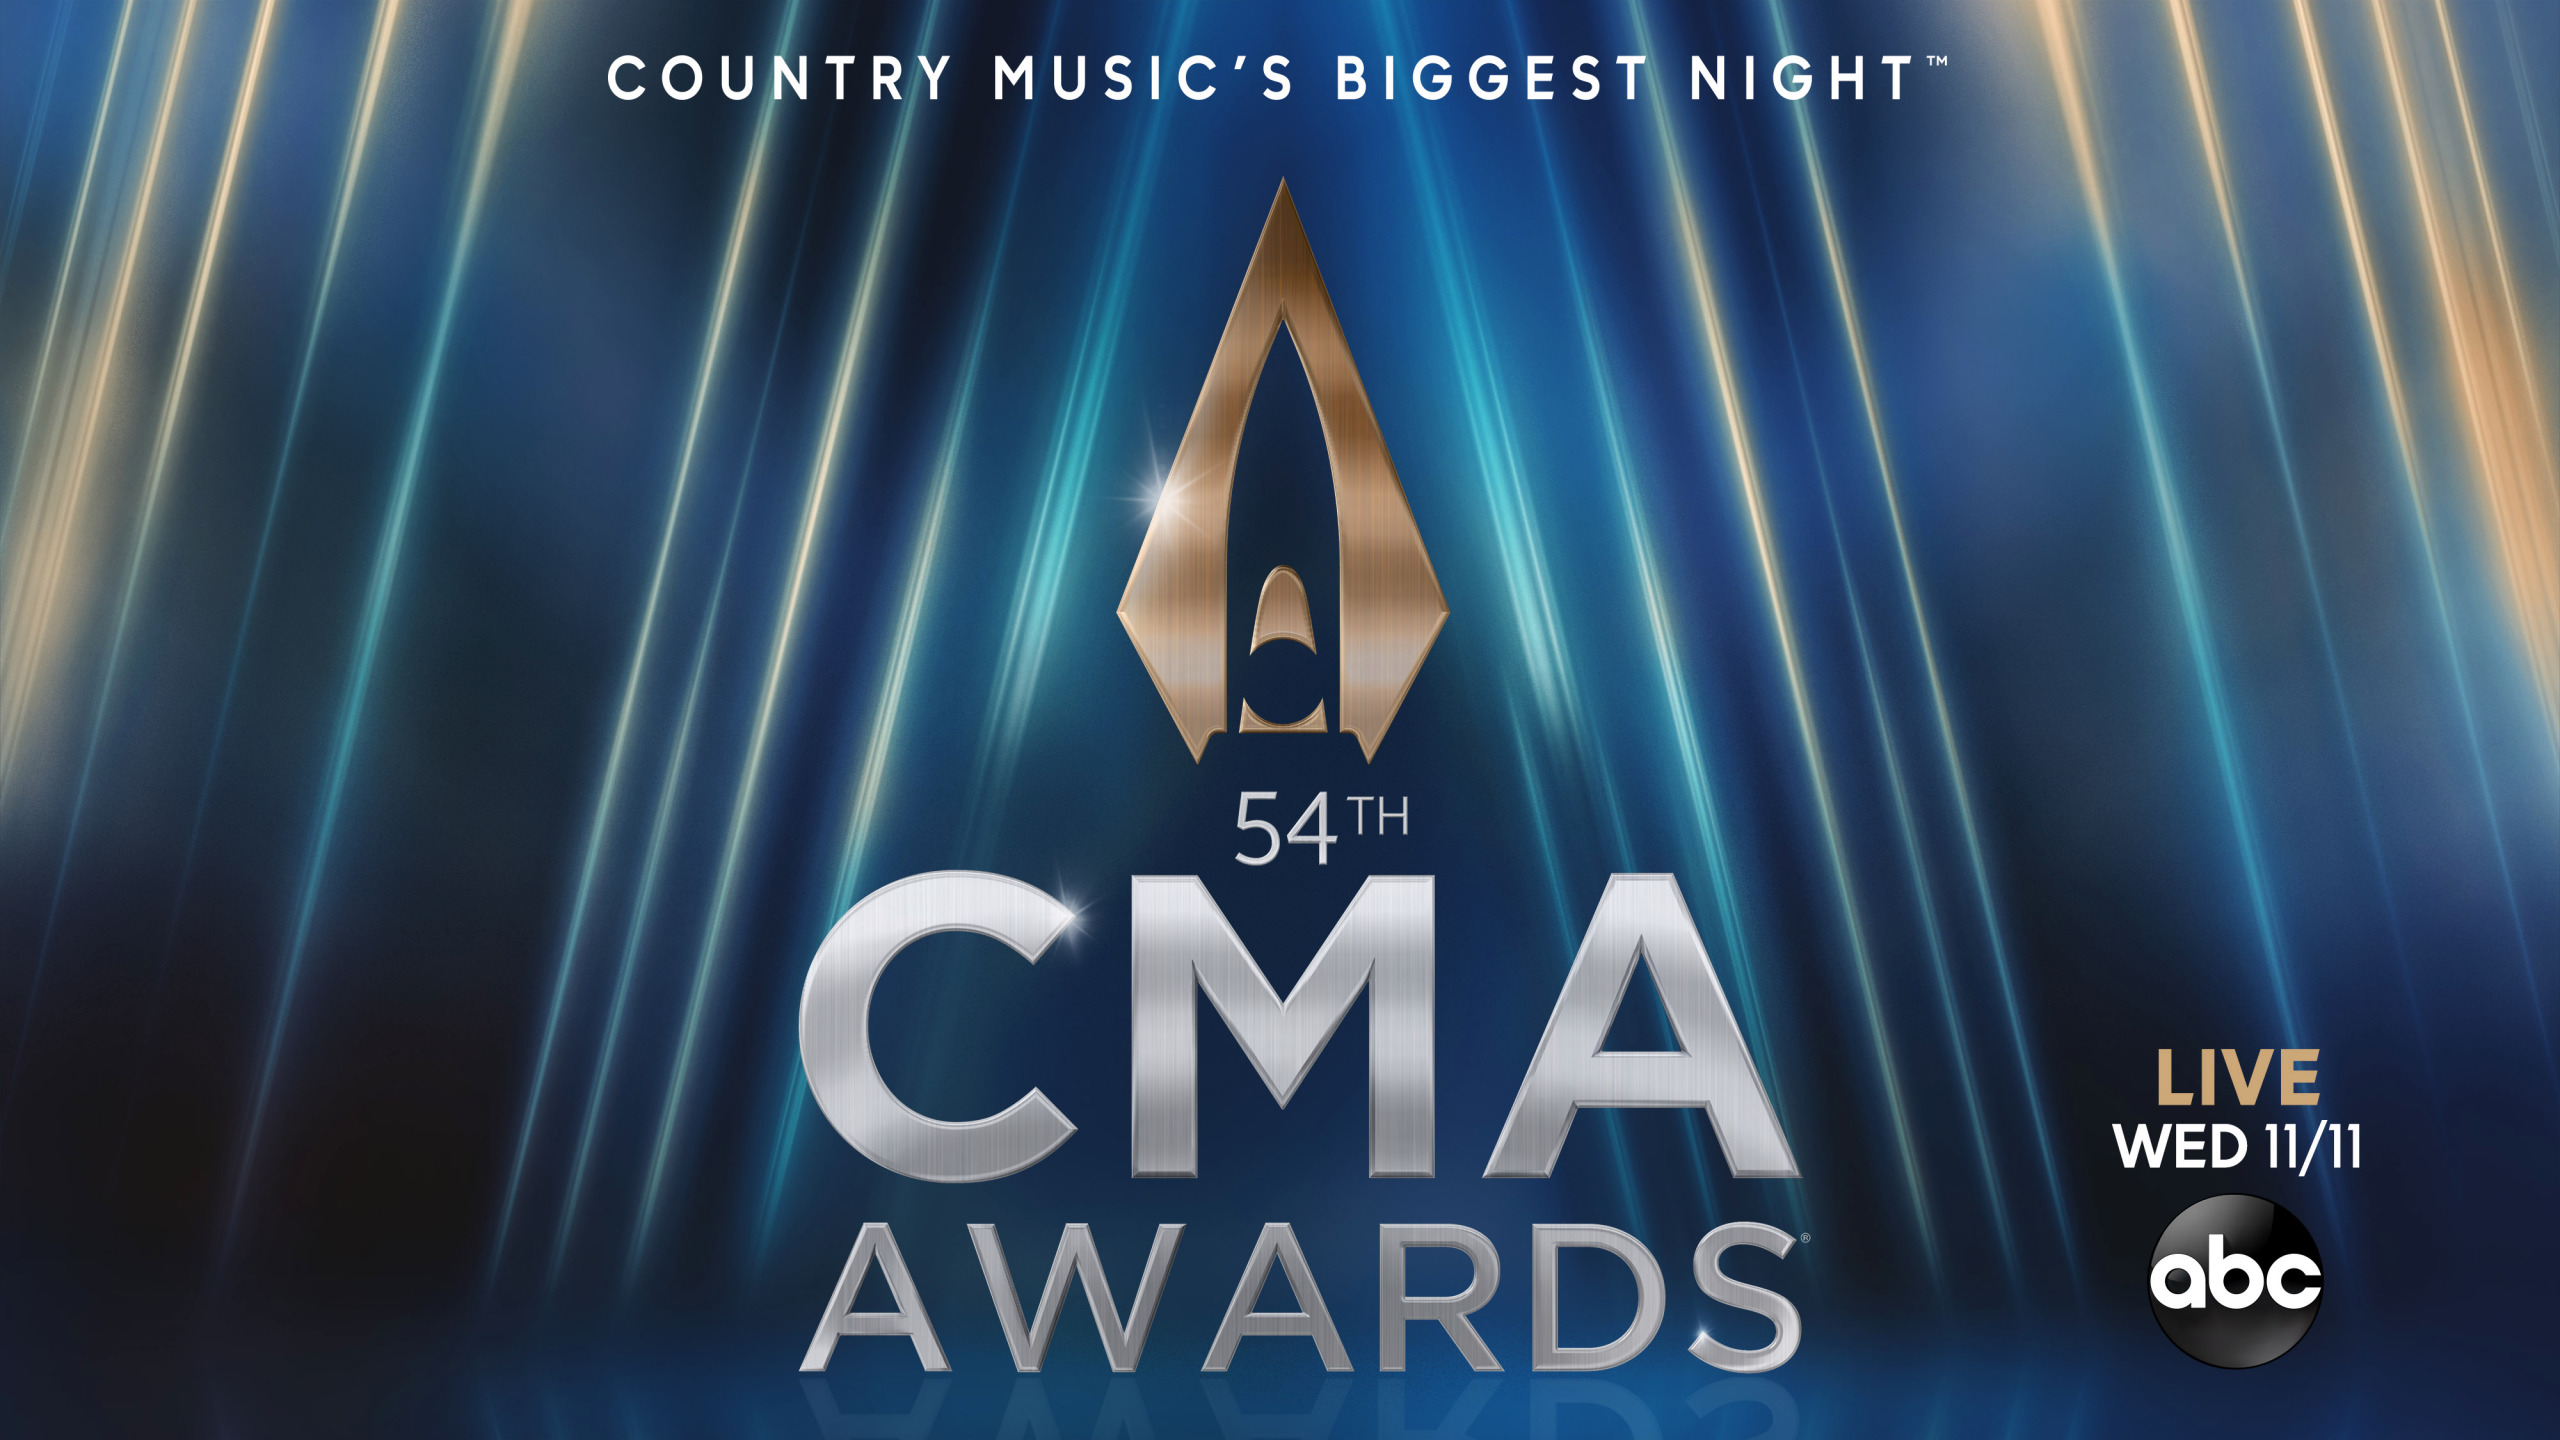 The 54th Annual 'CMA Awards' is Presented on ABC Programming Insider